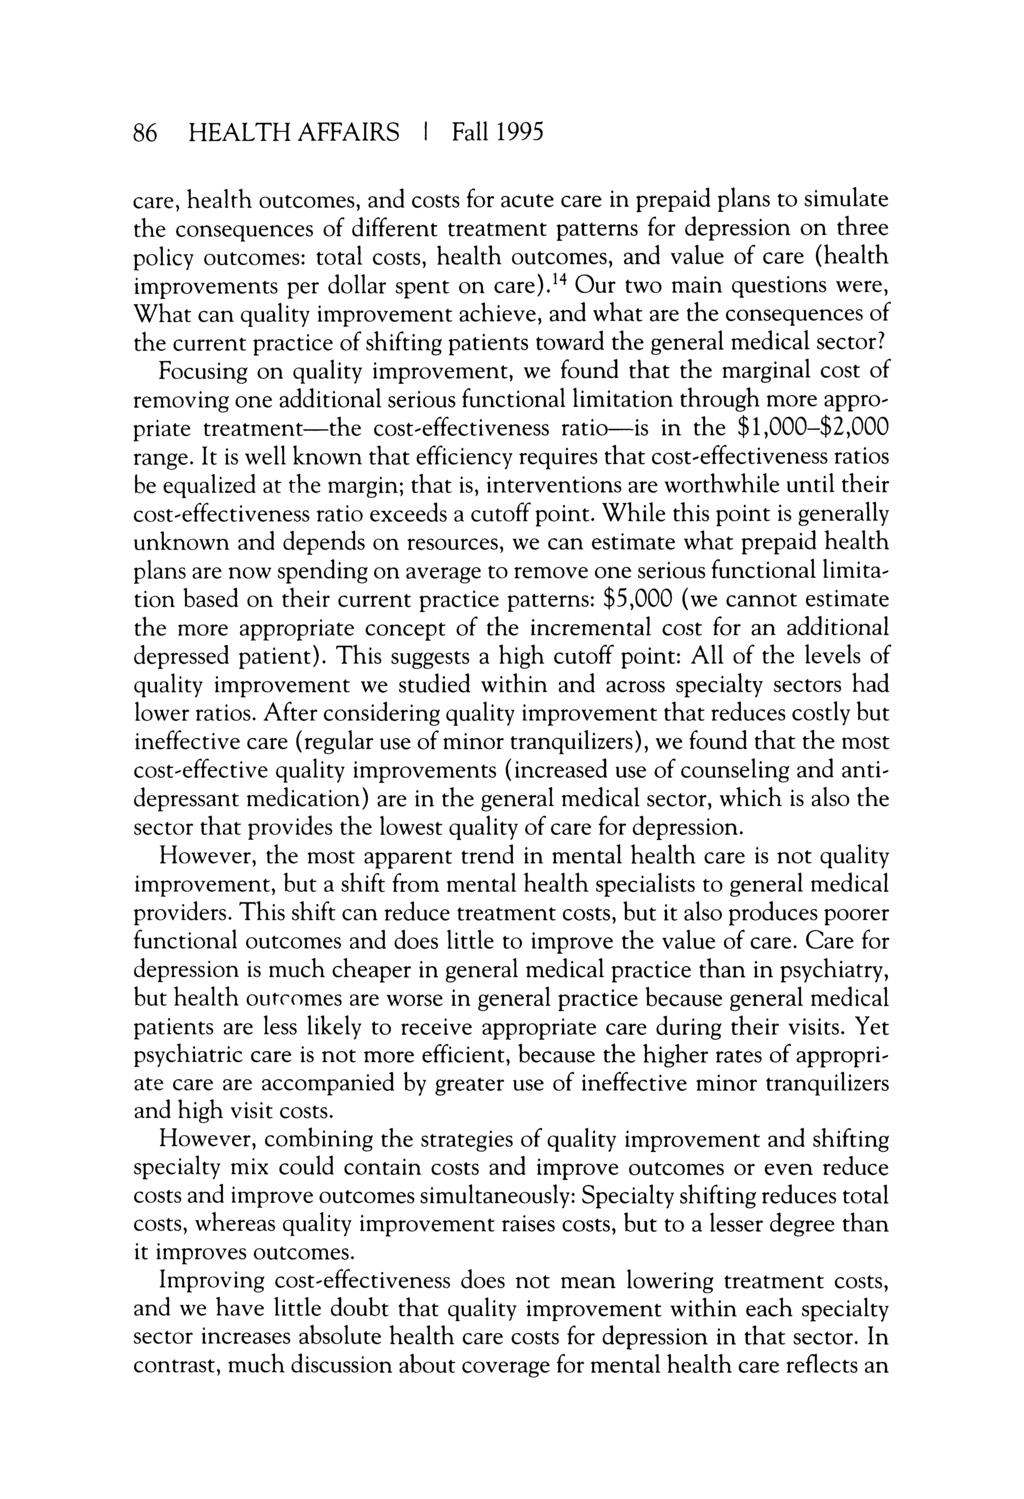 86 HEALTH AFFAIRS Fall 1995 care, health outcomes, and costs for acute care in prepaid plans to simulate the consequences of different treatment patterns for depression on three policy outcomes: